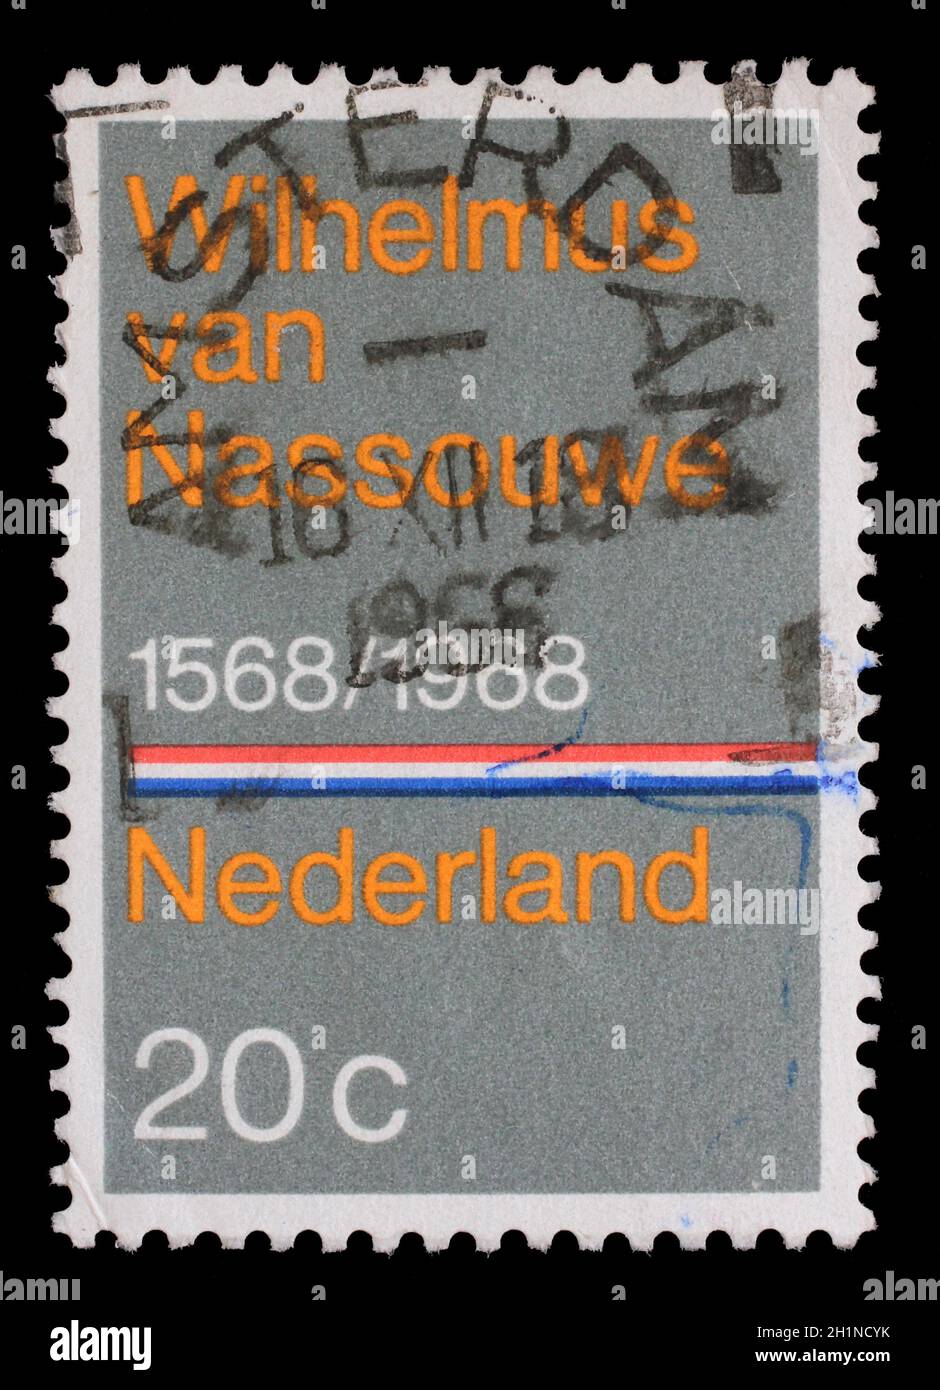 Stamp printed in the Netherlands issued for the 400th anniversary of Dutch National Anthem shows Wilhelmus van Nassouwe, circa 1968. Stock Photo